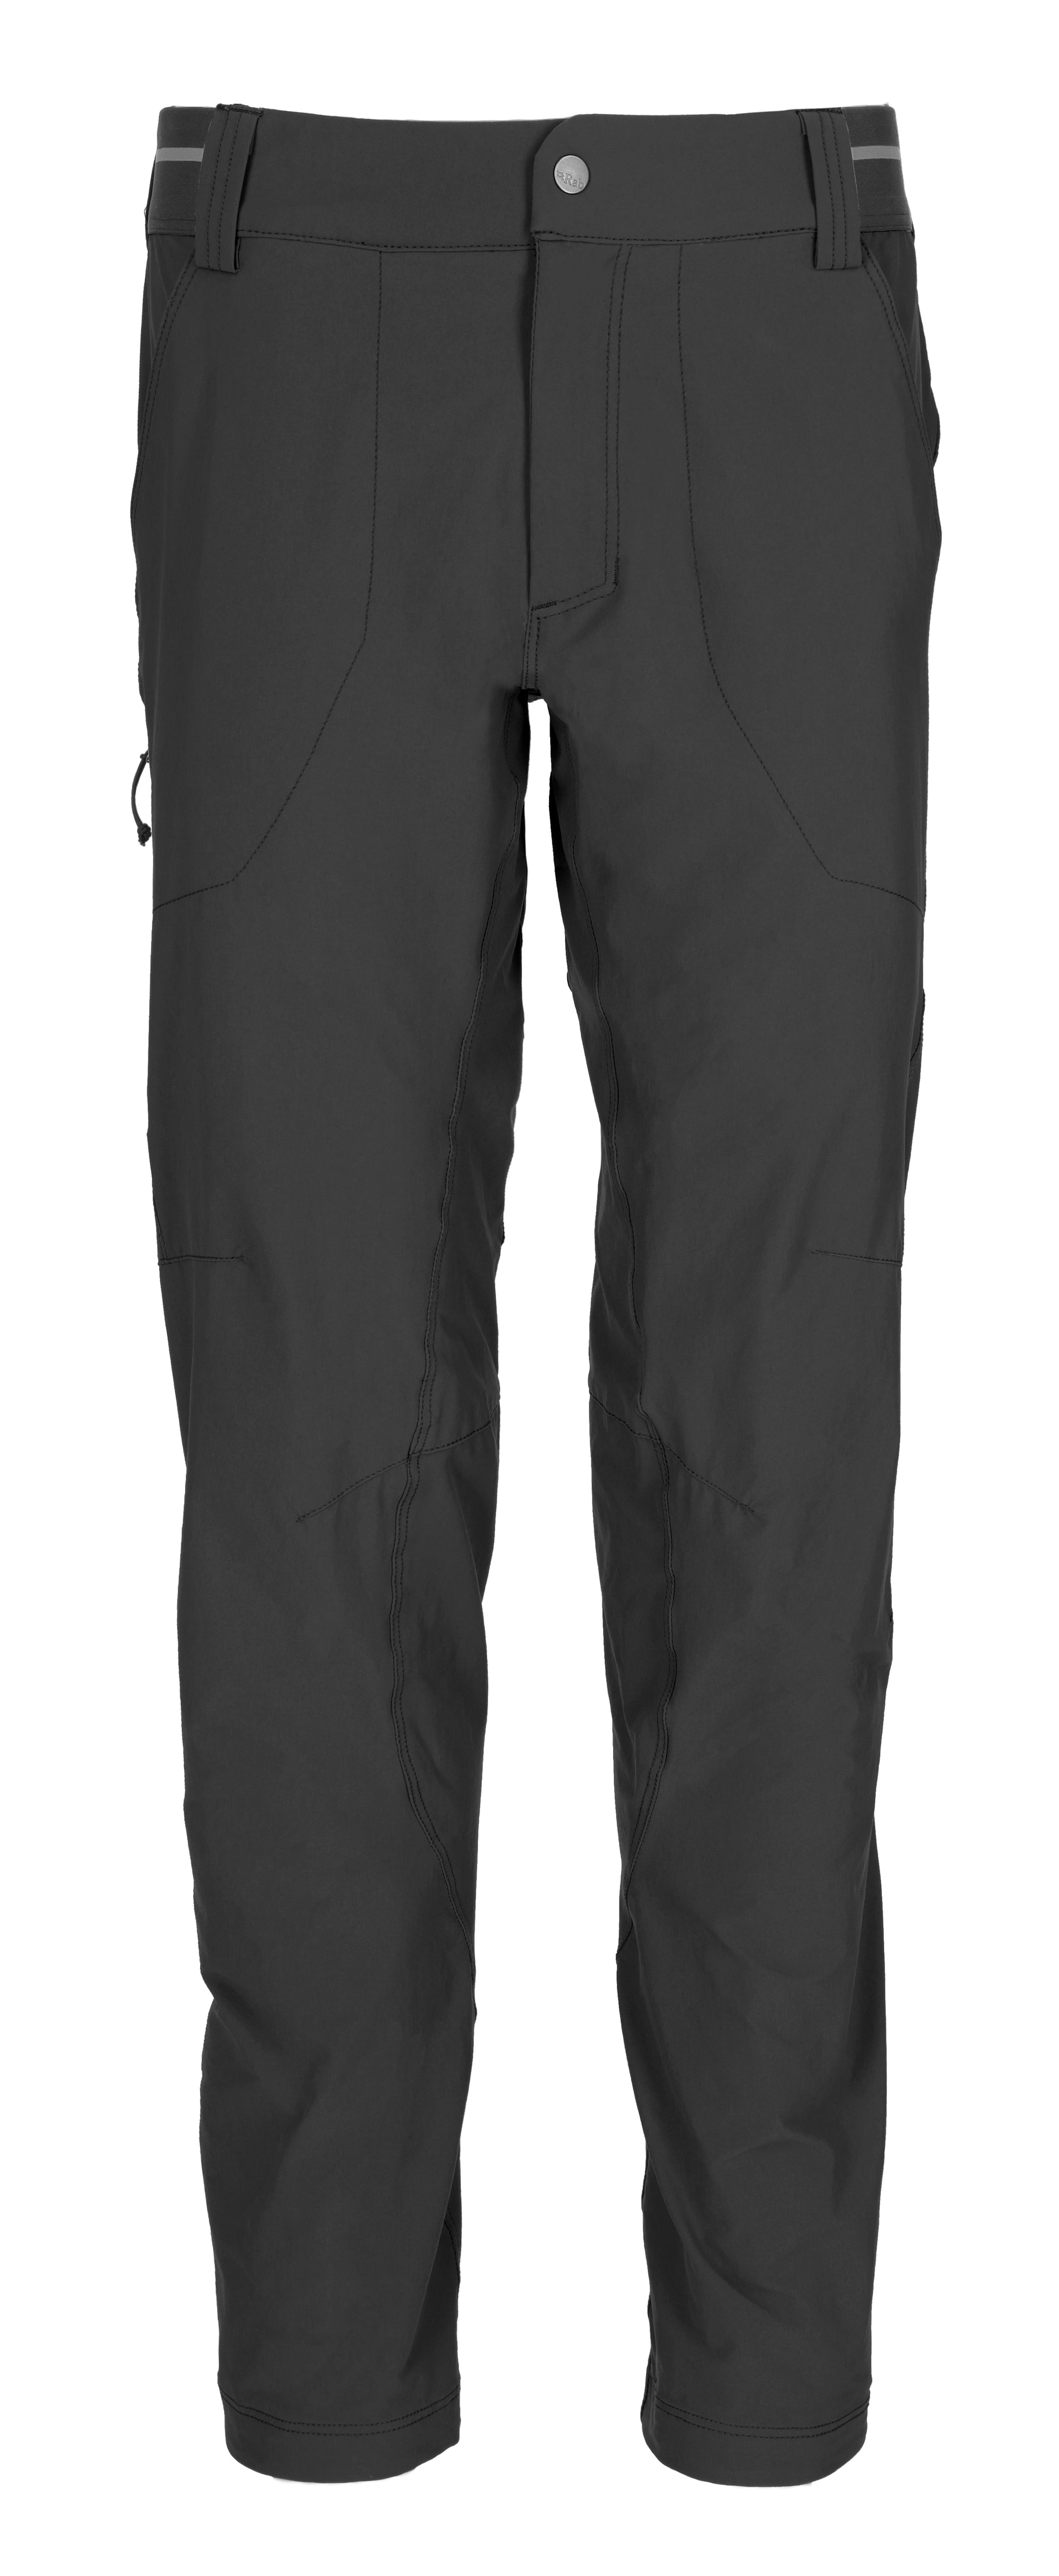 Rab Men's Capstone Pants - Outfitters Store